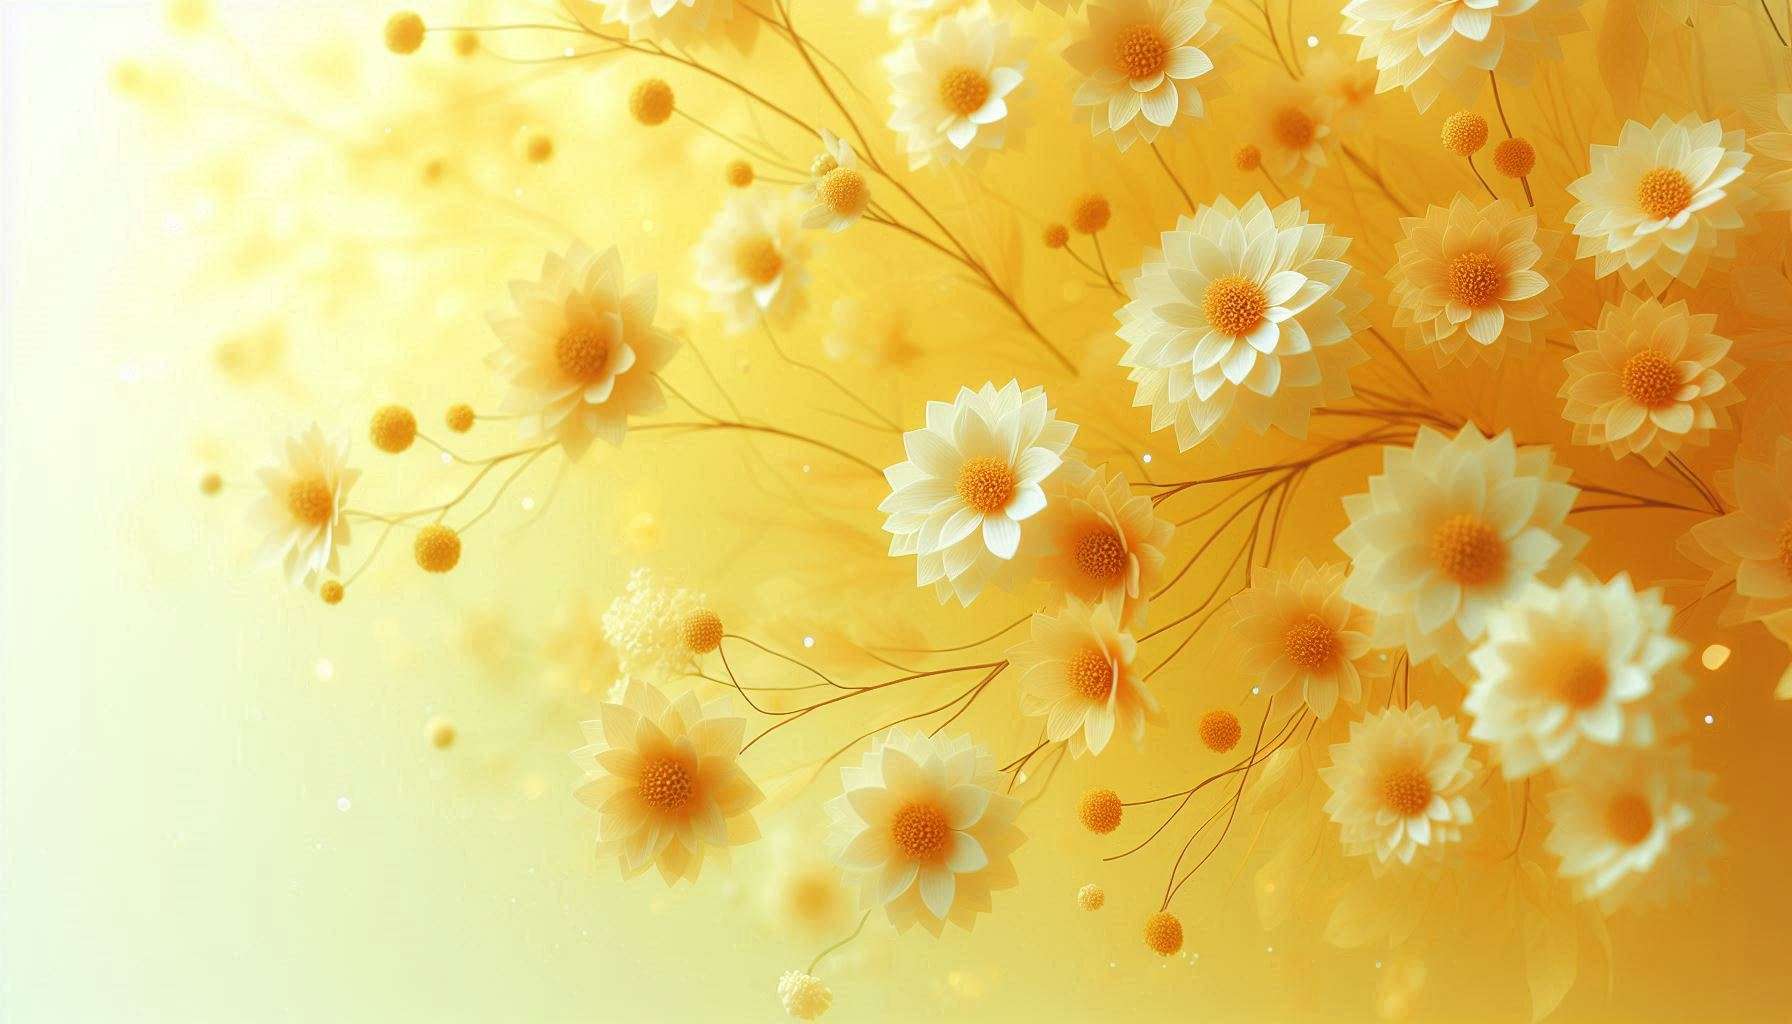 hd light yellow background with flower